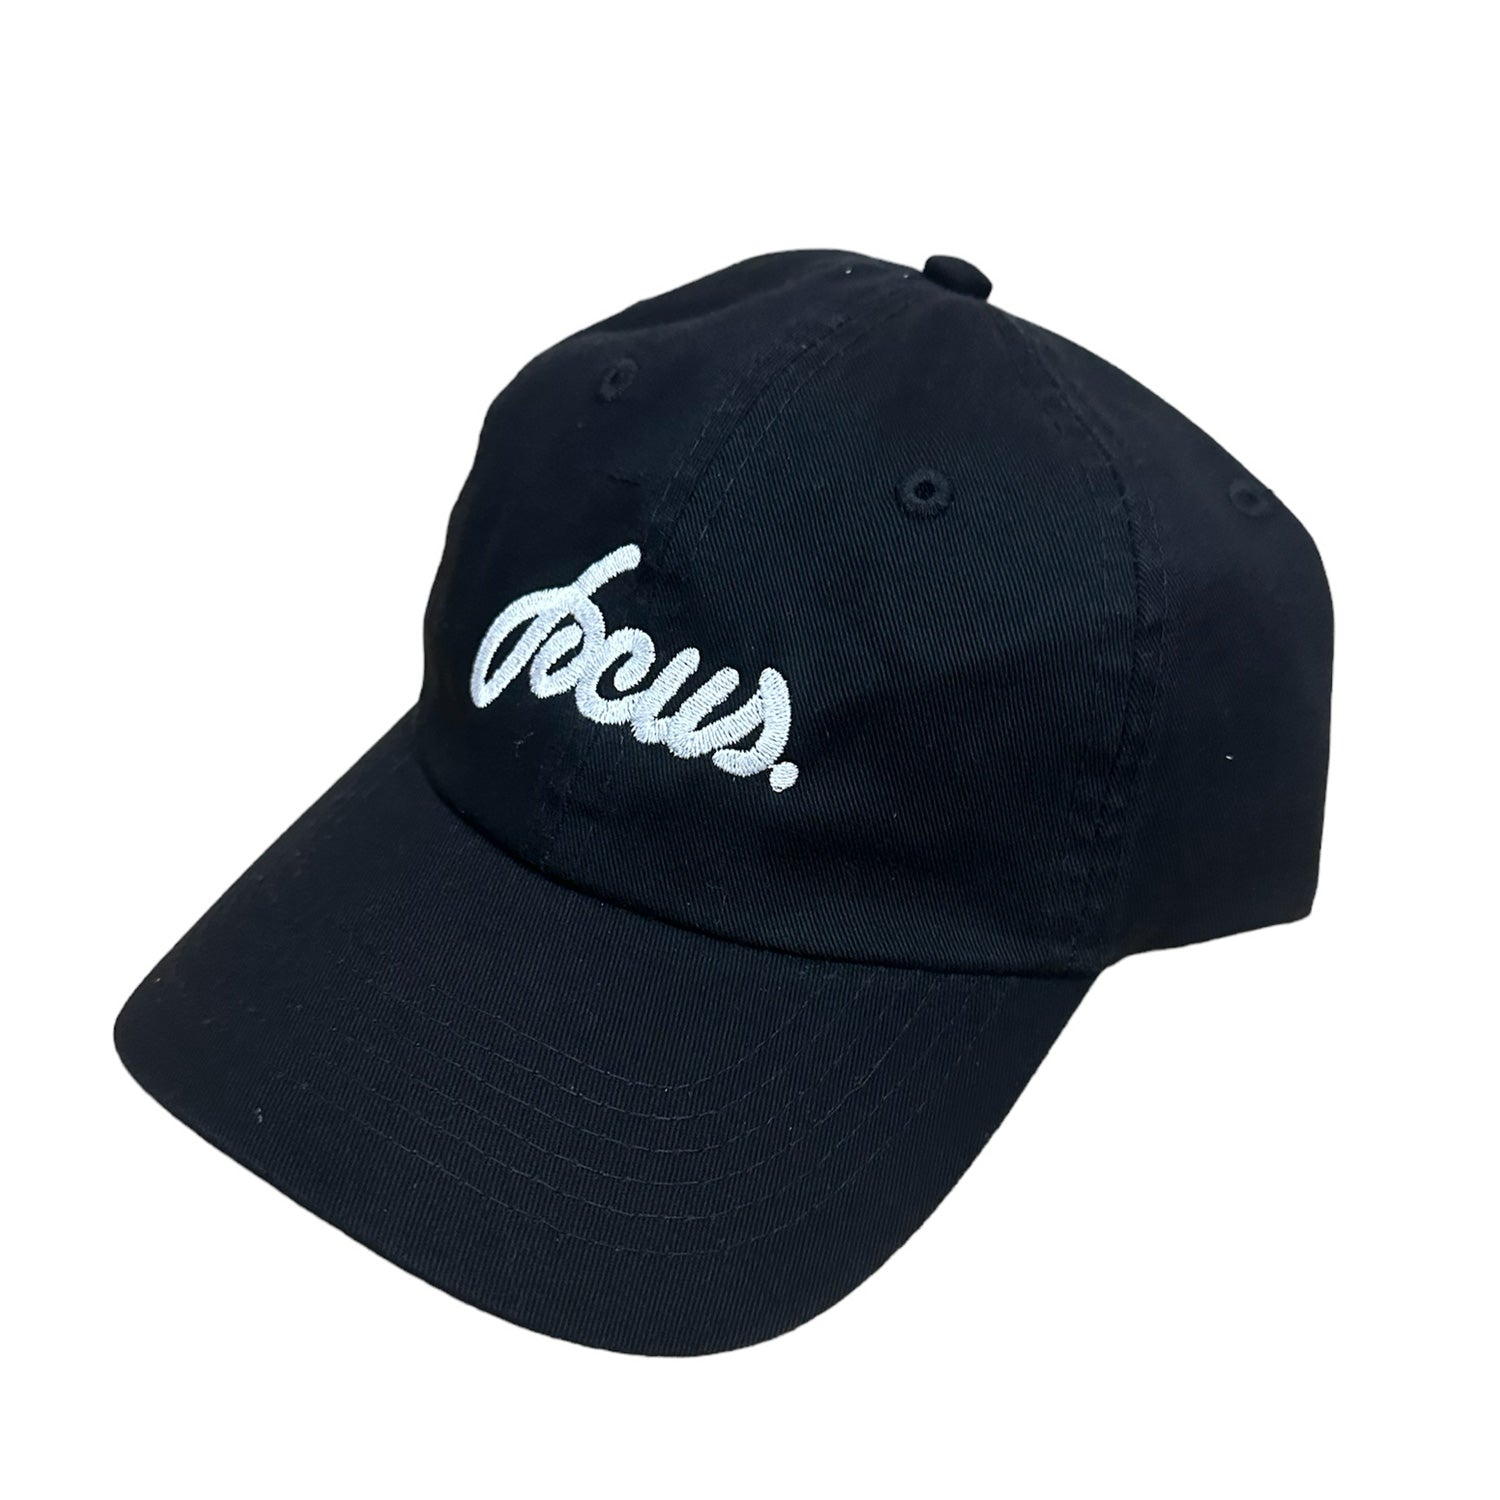 Black focus logo 6 panel cap with white script logo on front. Free uk shipping over £50